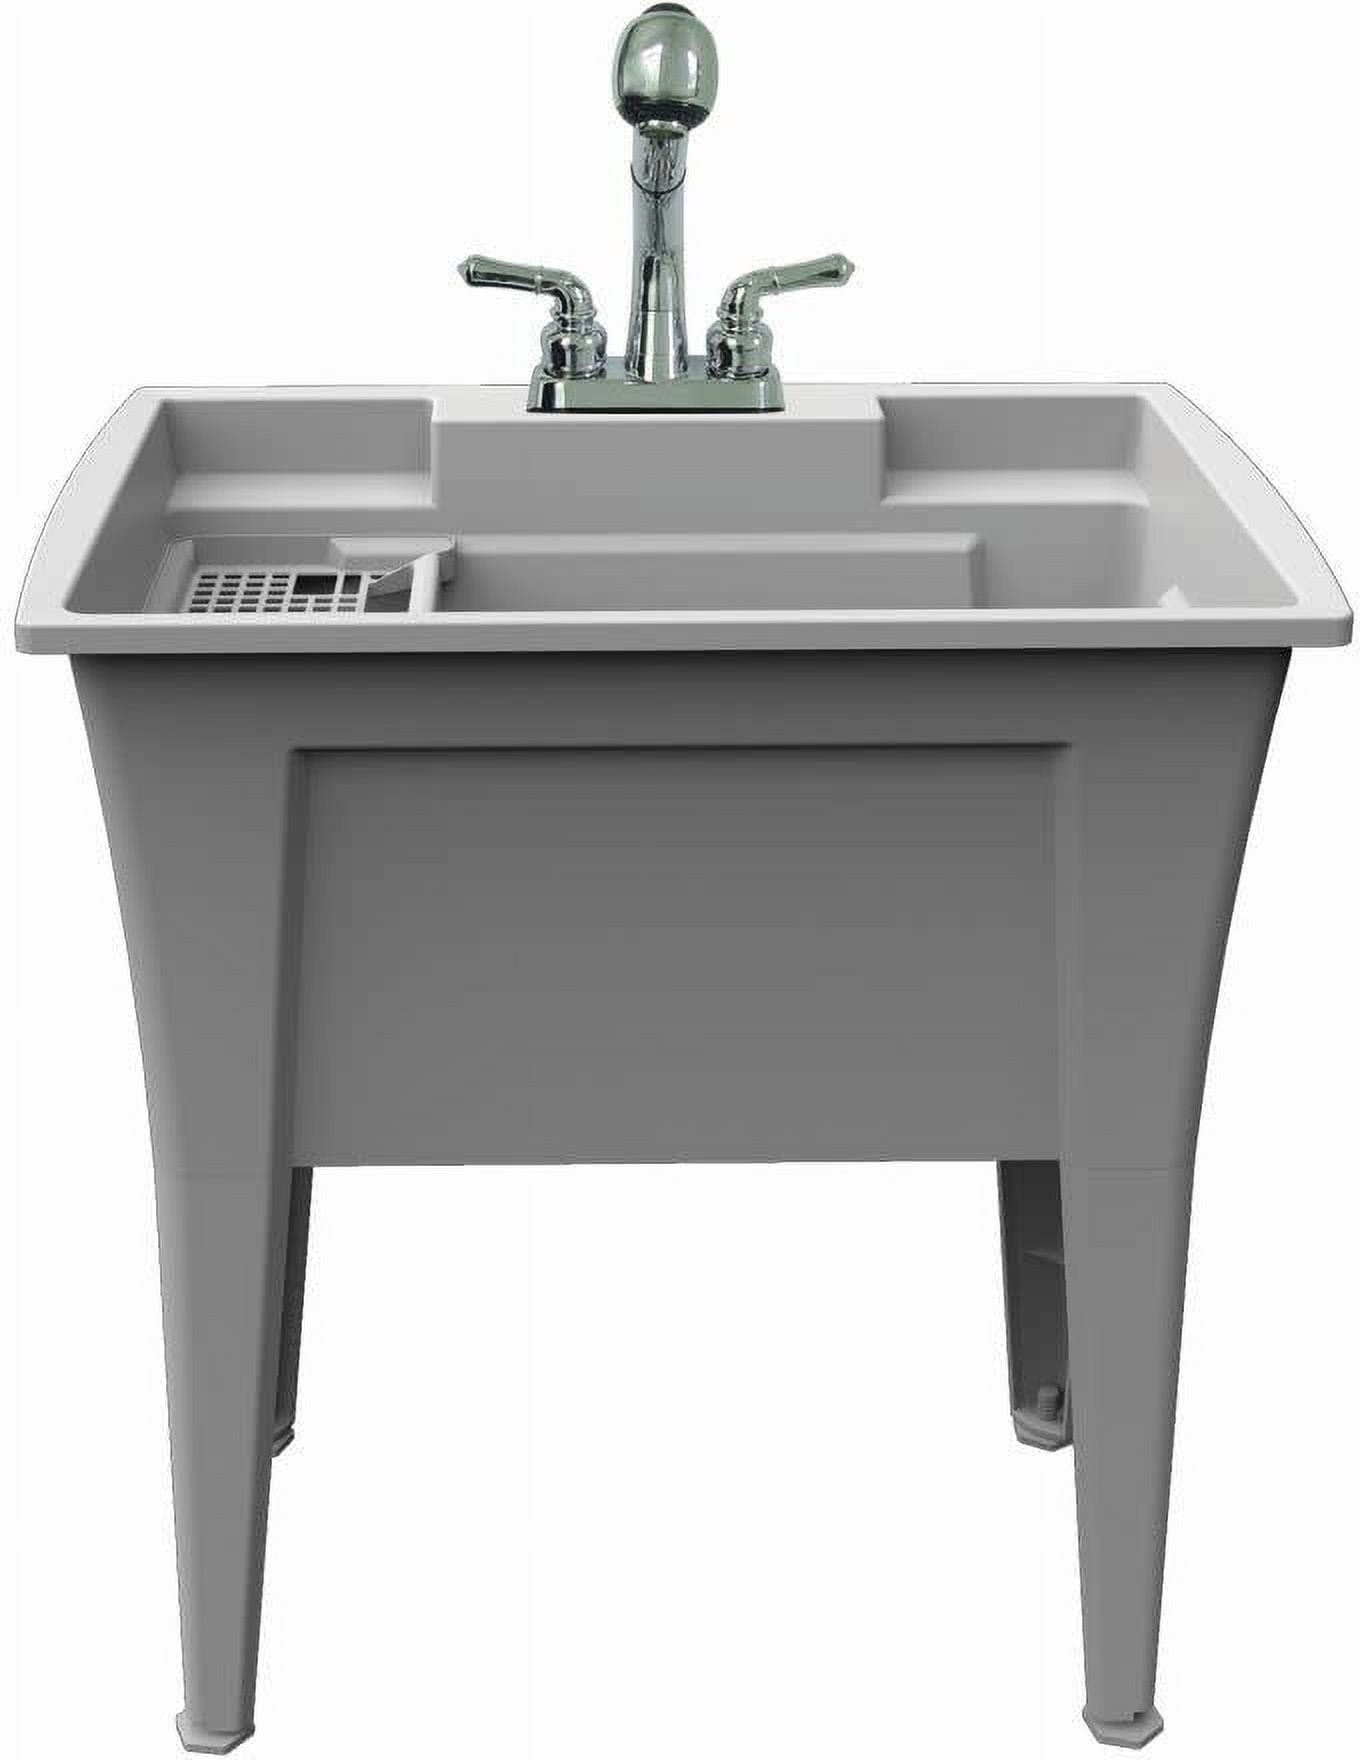 Picture of A & E Bath LT-32-01 32 in. Jewel Laundry Tub Kit with Faucet